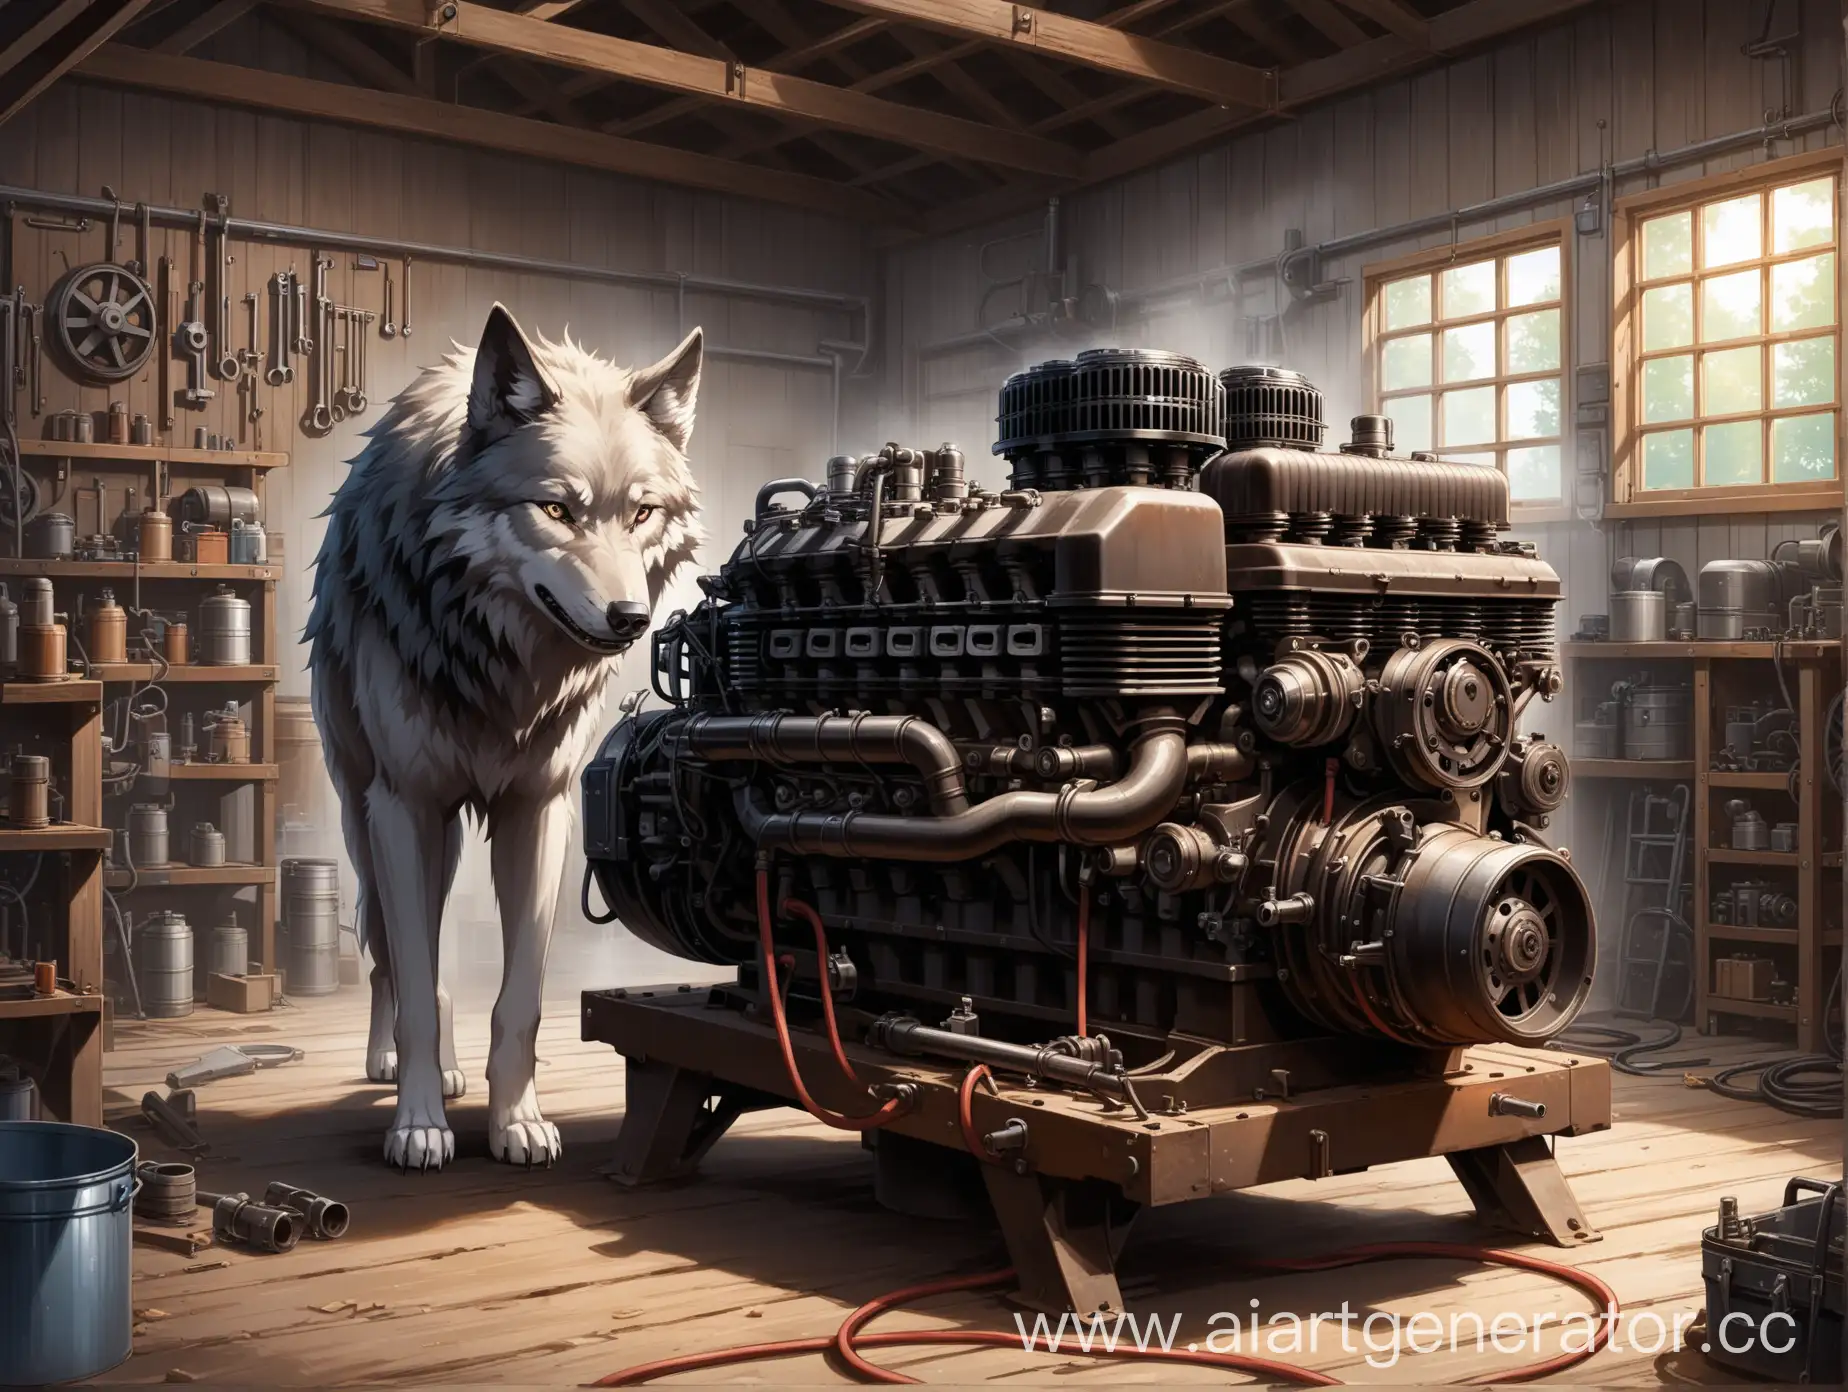 Mechanical-Wolf-Building-Engine-in-Rustic-Garage